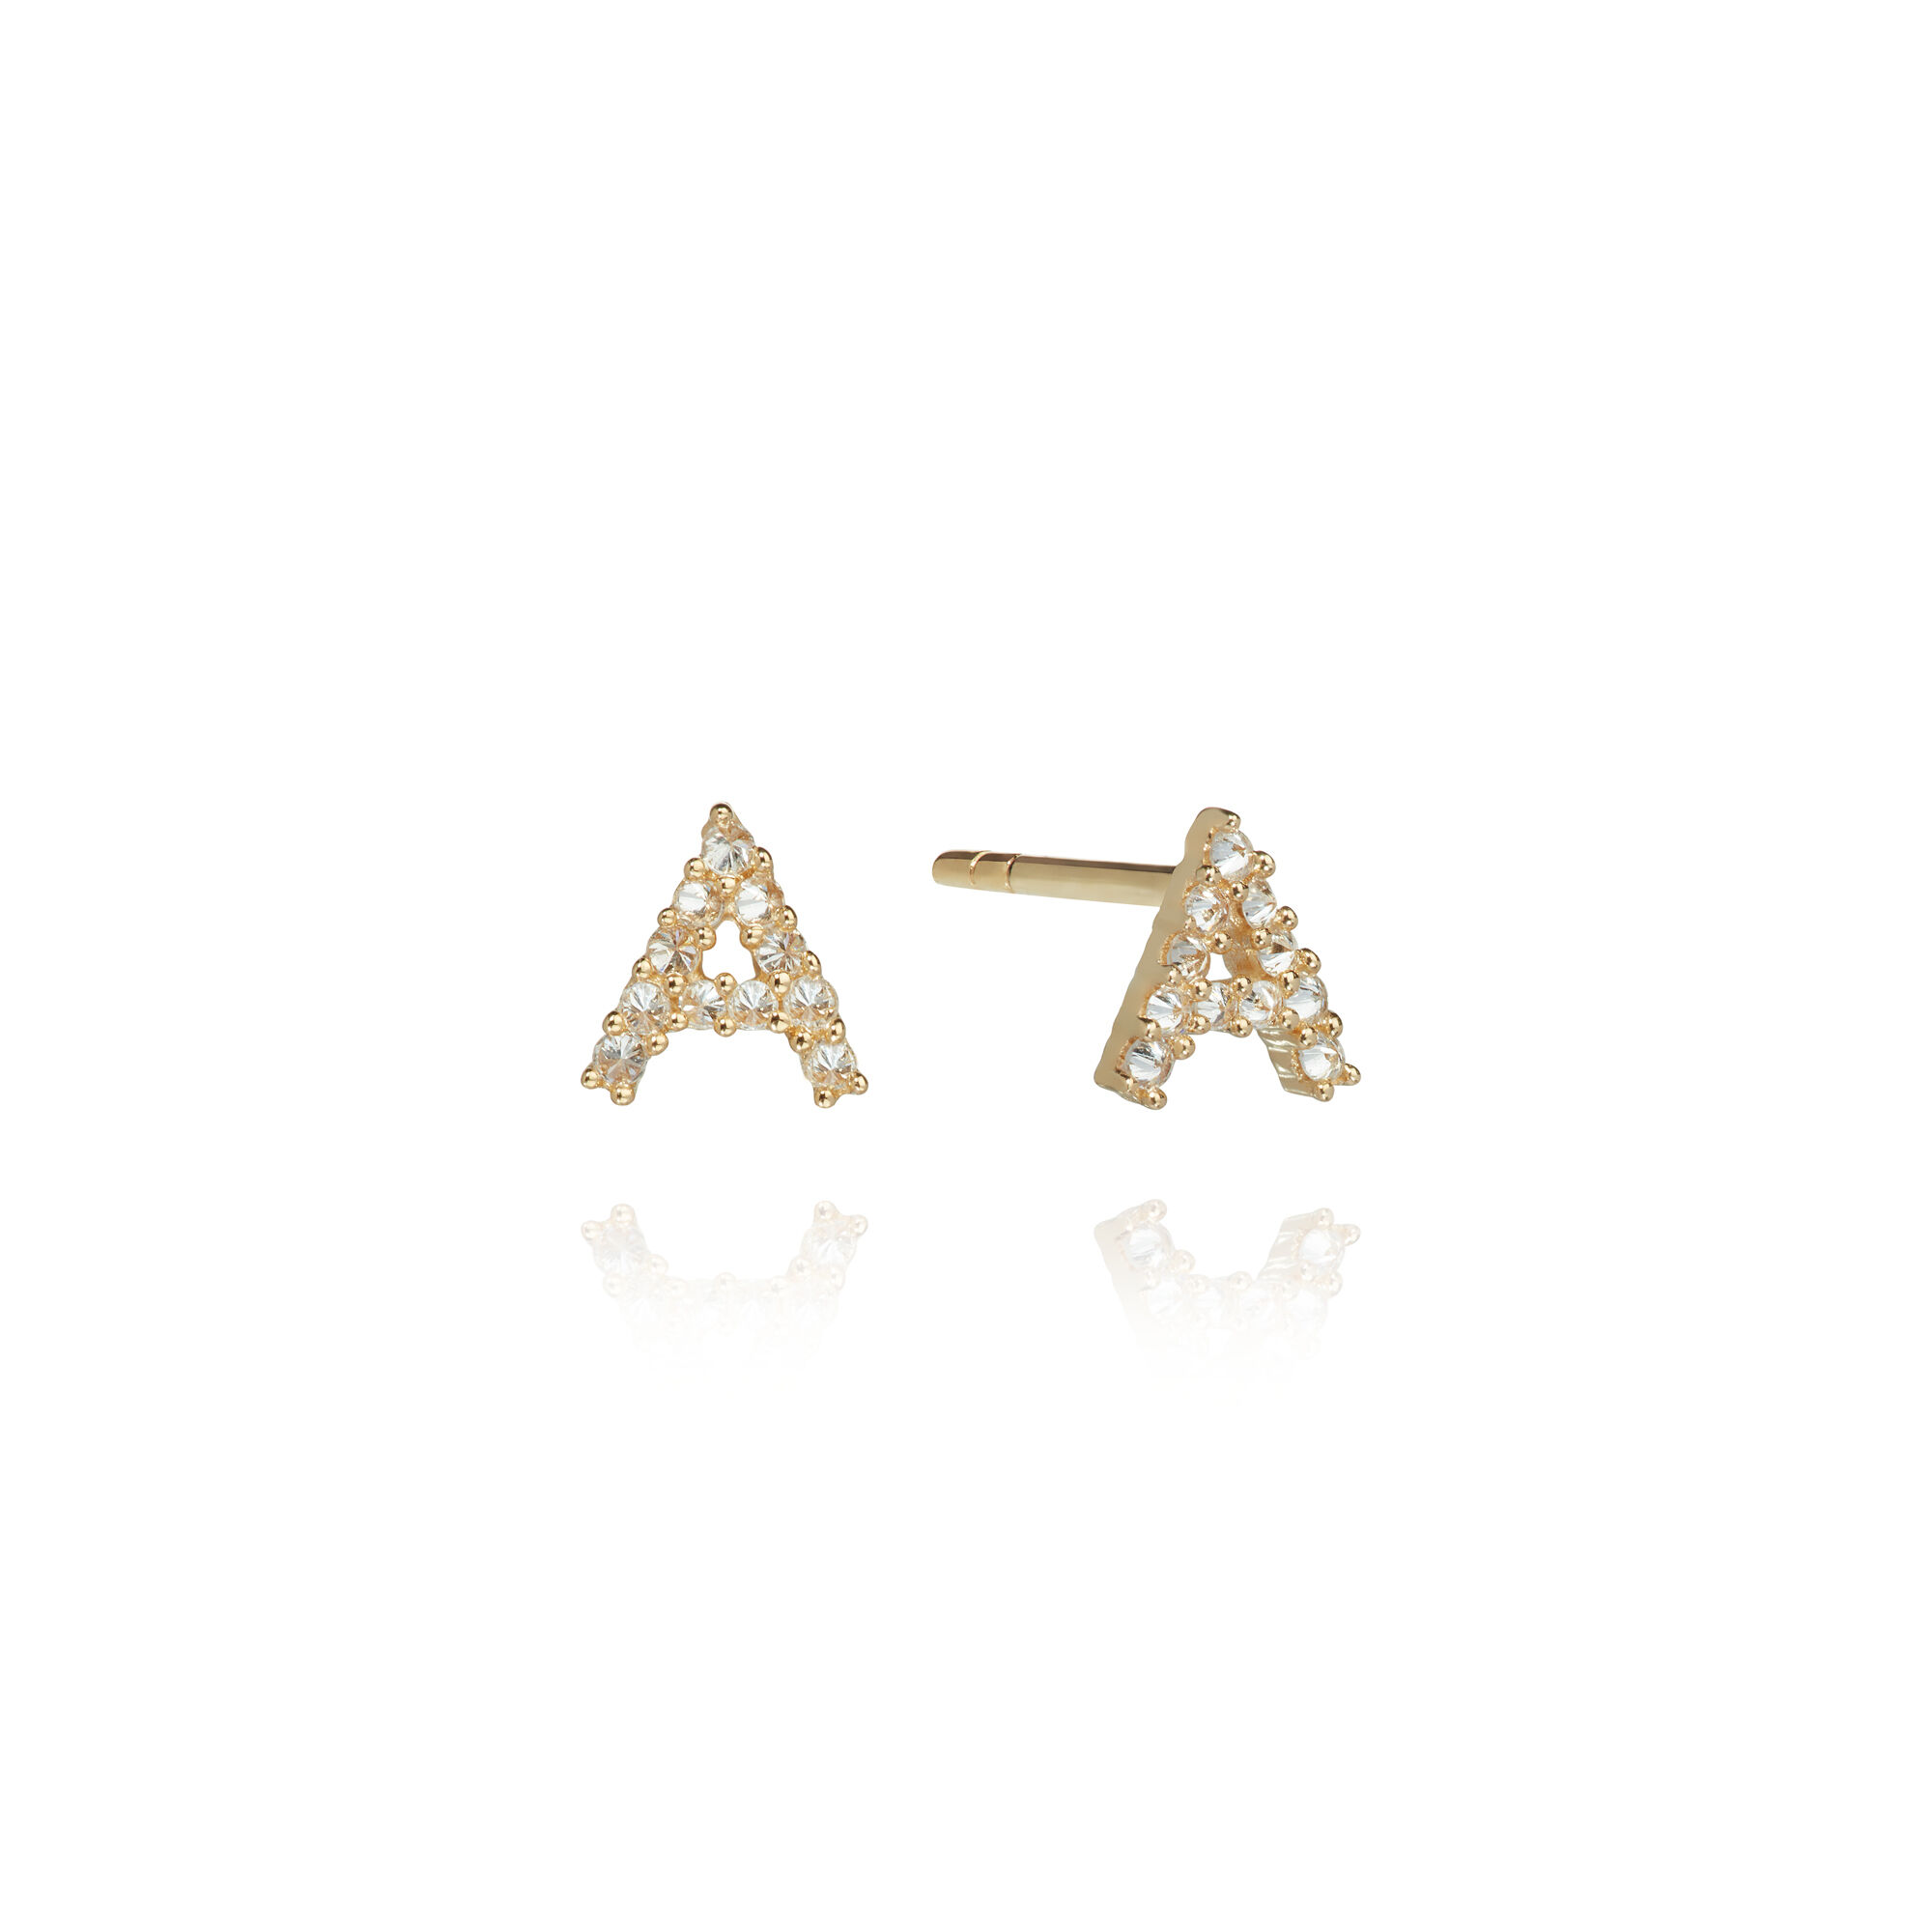 Buy Diamond Initials Earring Studs pairdiamond Letter Studs Online in India   Etsy